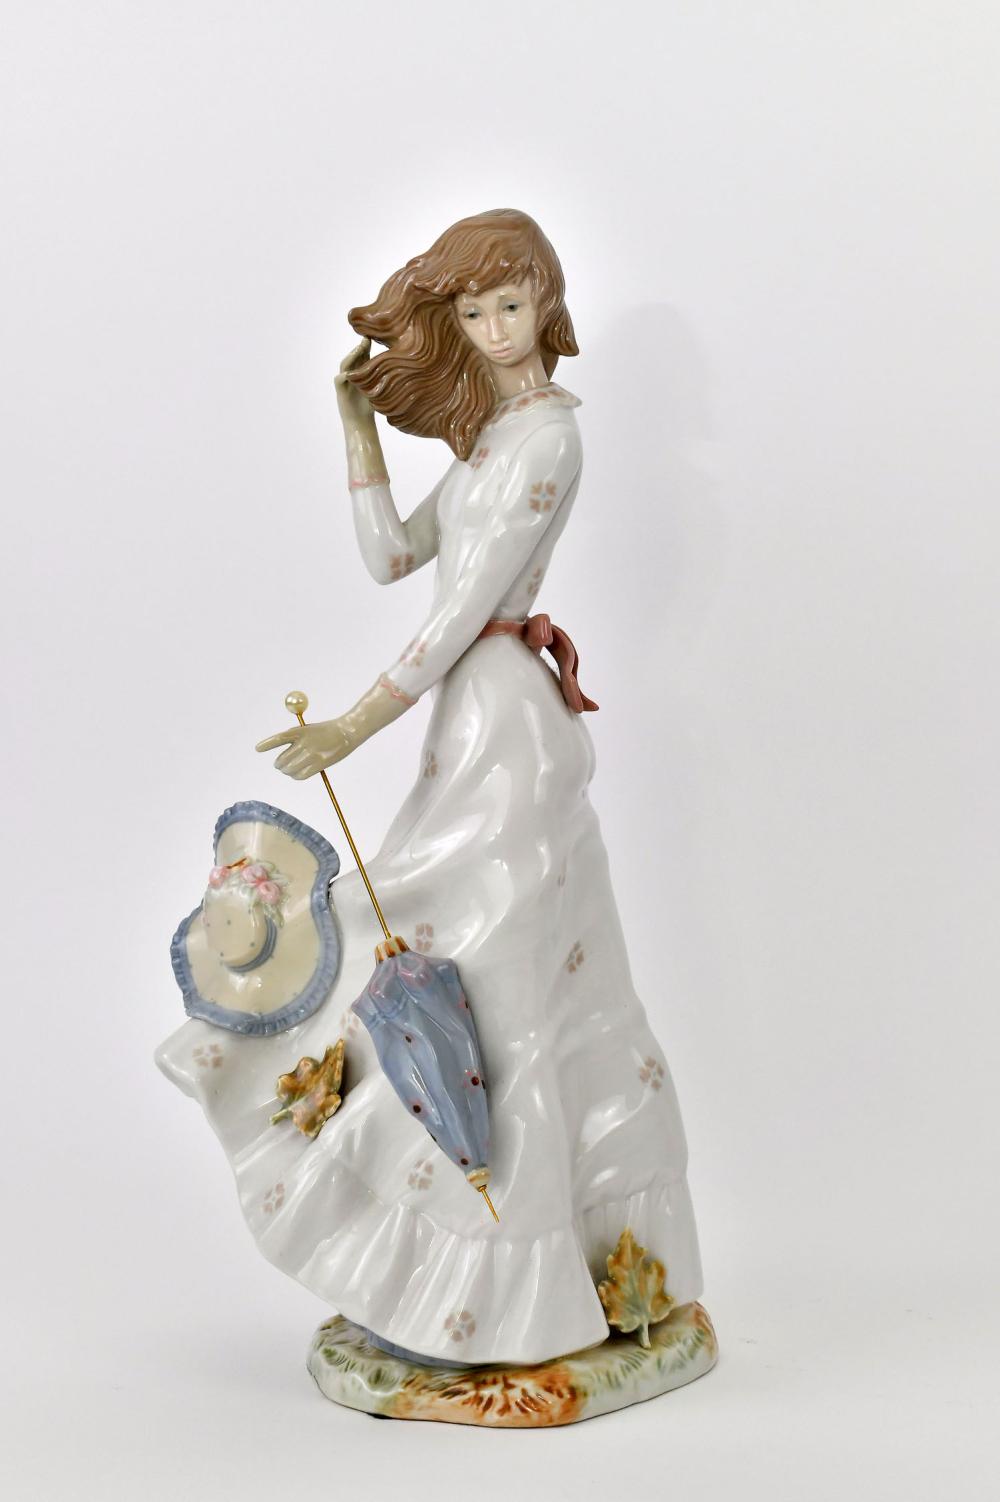 ZAPHIN PORCELAIN FIGURE OF A LADYSigned,